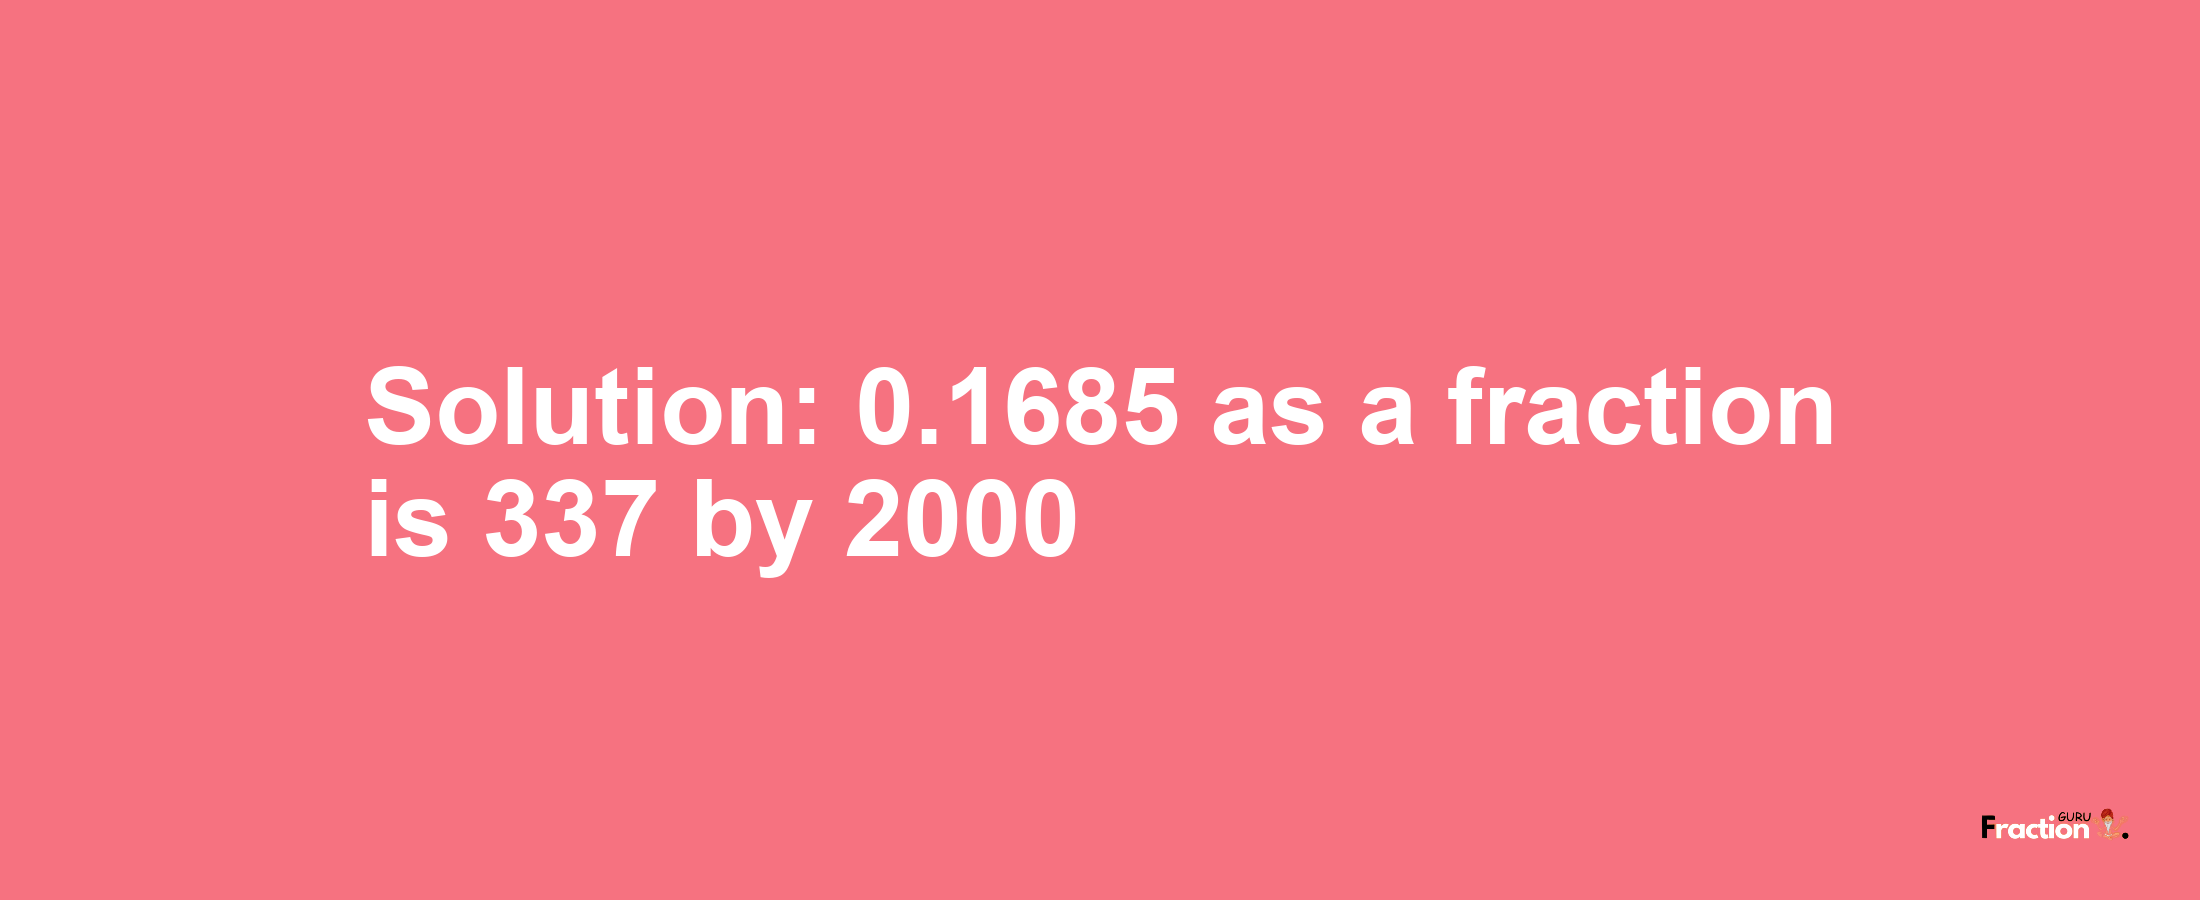 Solution:0.1685 as a fraction is 337/2000